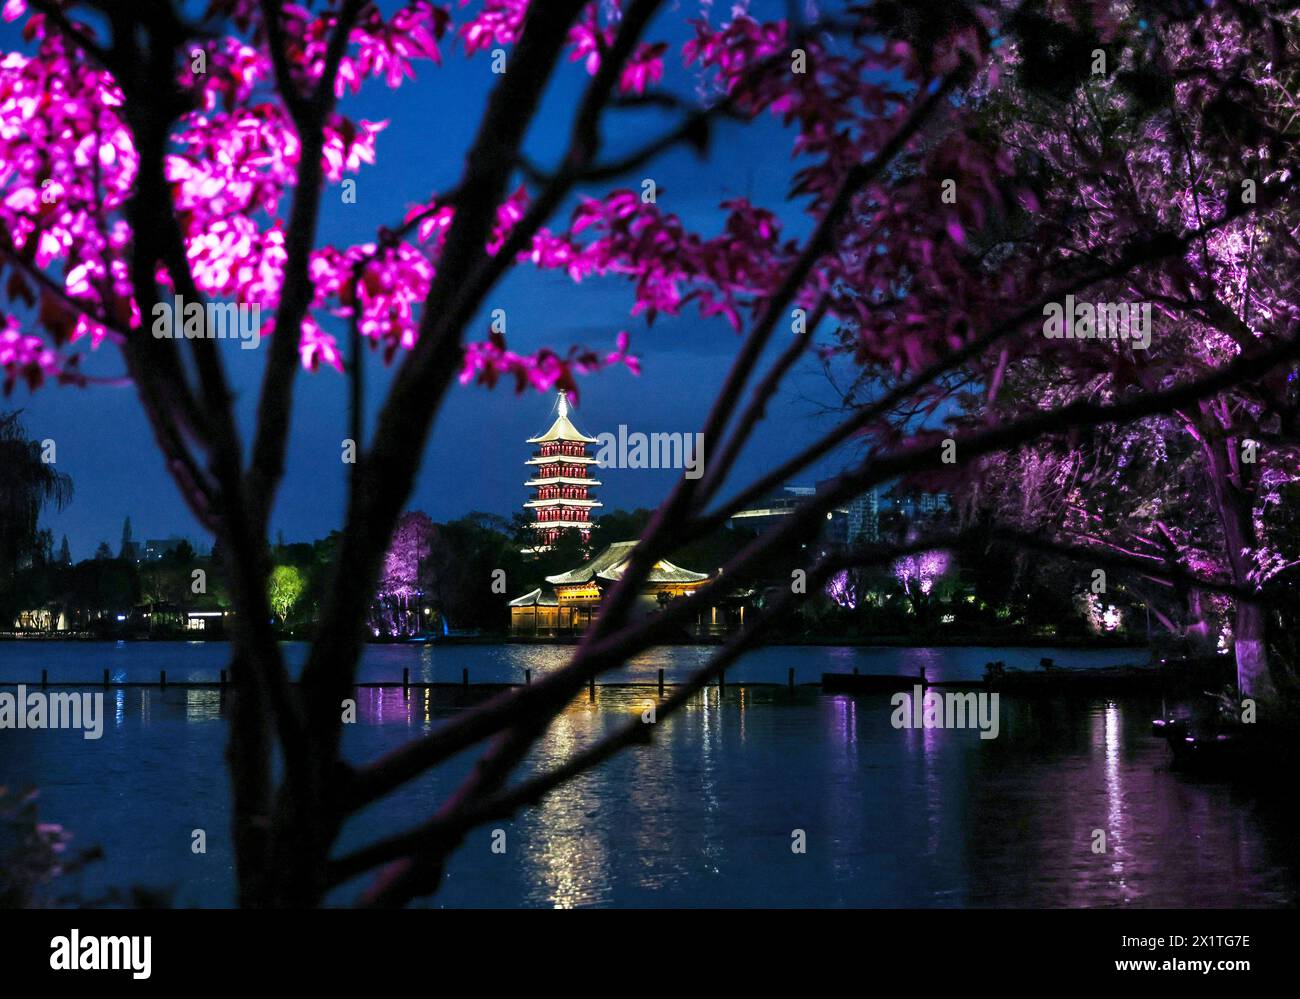 (240418) -- JIAXING(ZHEJIANG), April 18, 2024 (Xinhua) -- A tower is seen at night by the Nanhu Lake in Jiaxing City, east China's Zhejiang Province, April 10, 2024. Located in east China's Zhejiang Province, the waterside city Jiaxing is renowned for tourist destinations Nanhu Lake and Wuzhen. In the breezy month of April, the two tourist hotspots come alive with the gentle touch of spring. Nanhu Lake, with its shimmering waters and willow trees swaying along the lakeside, is a sight to behold. The historic water town Wuzhen also enchants with its emerald waters and whitewashed walls ador Stock Photo